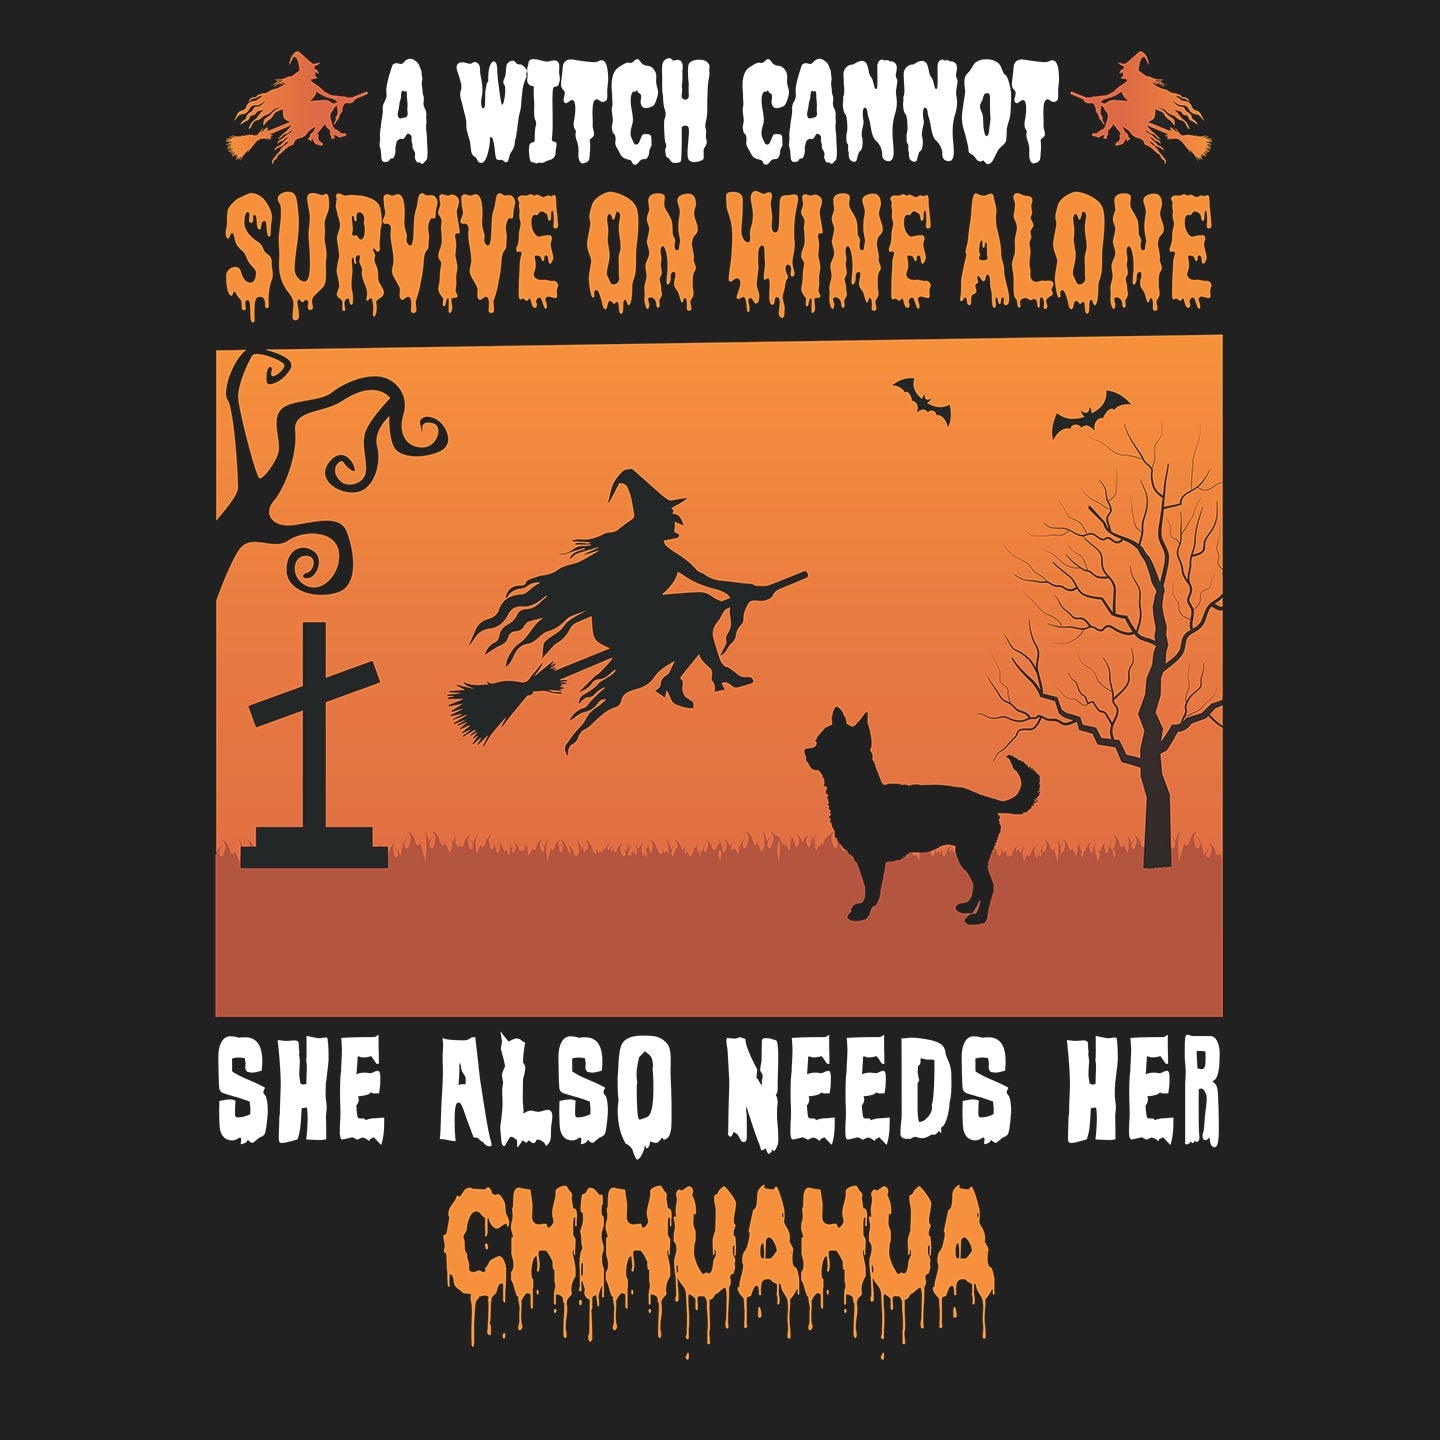 A Witch Needs Her Chihuahua (Shorthaired) - Adult Unisex Crewneck Sweatshirt